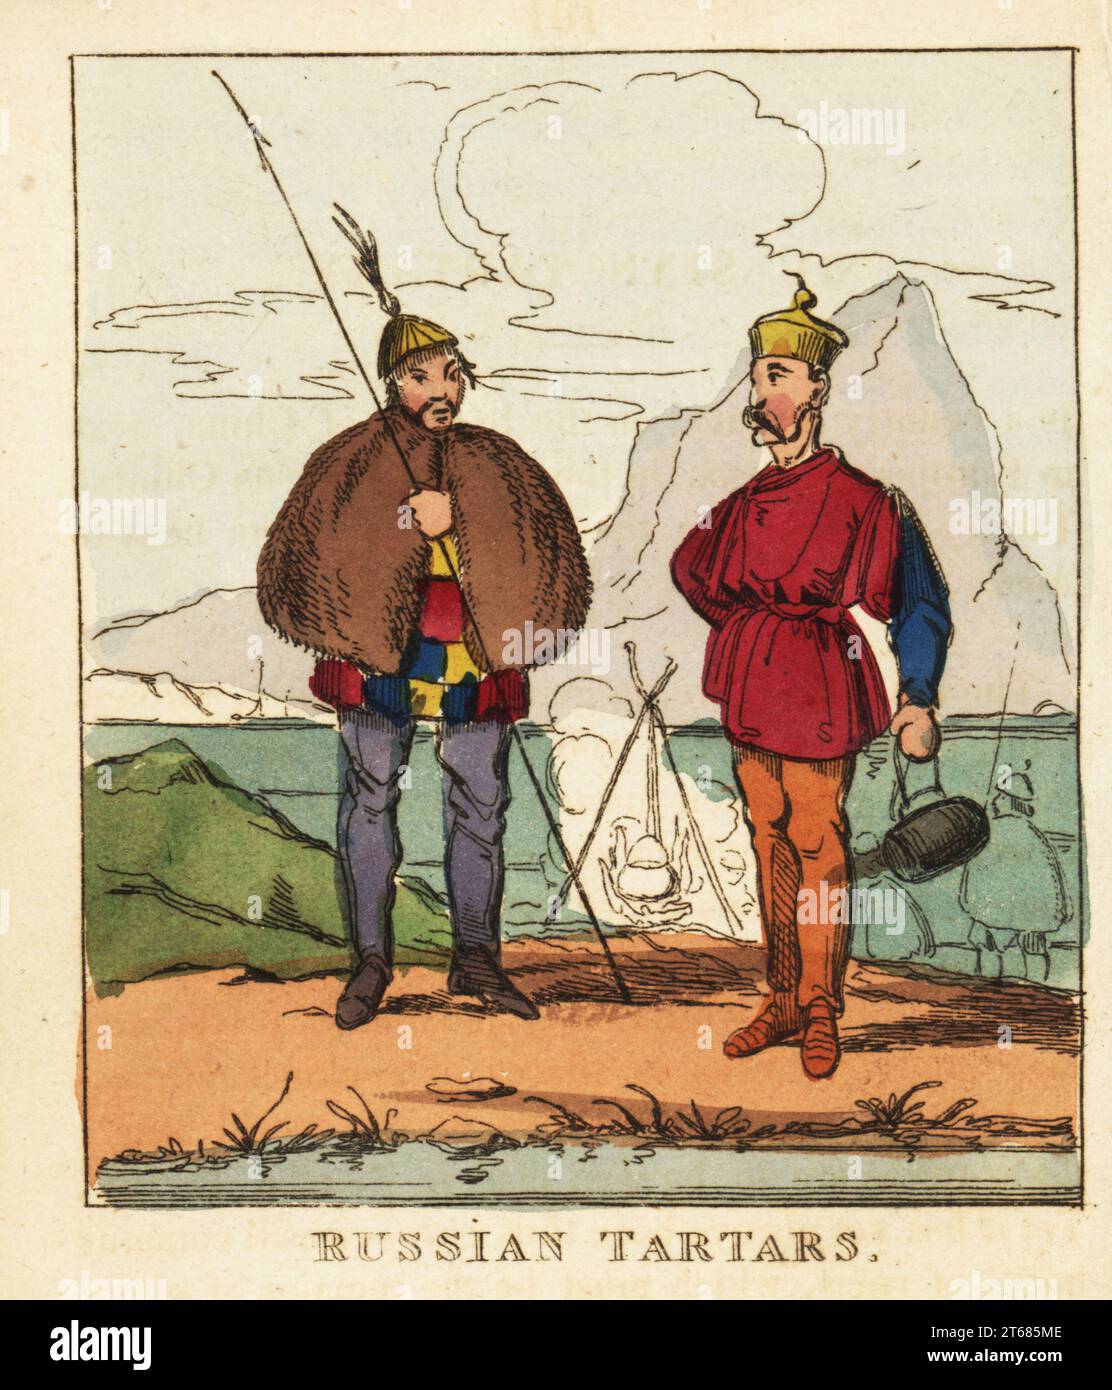 Costumes of Russian Tatars, 19th century. A soldier in helmet, fur cape, colourful tunic, trousers armed with a spear. Another man in hat, tunic and trousers. Tartars. Handcoloured copperplate engraving from The World in Miniature, or Panorama of the Costumes, Manners & Customs of All Nations, John Bysh, London, 1825. Stock Photo